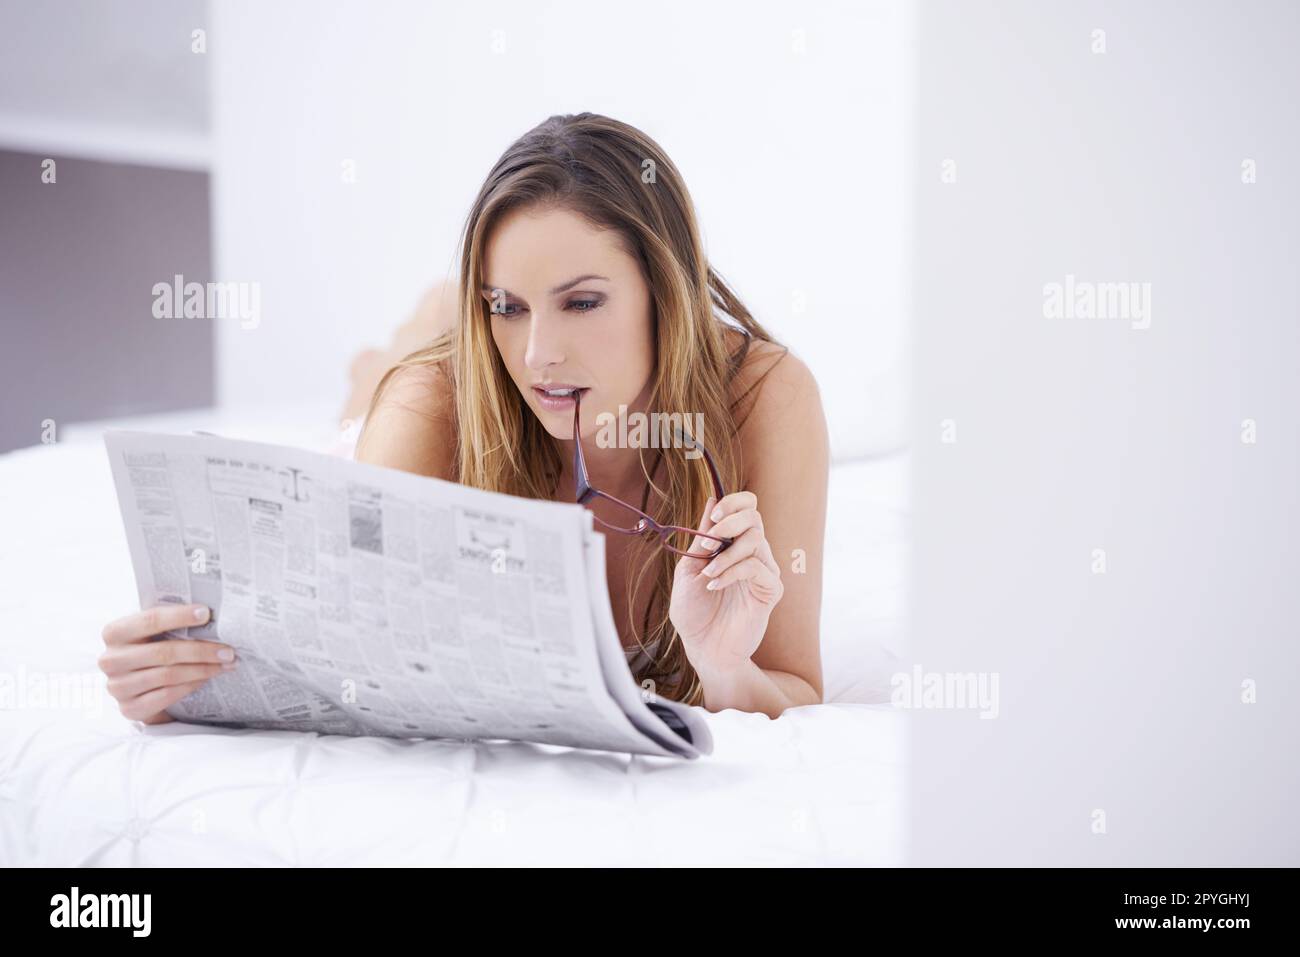 Catching up on current events. An attractive young woman reading the paper while lying on her bed. Stock Photo